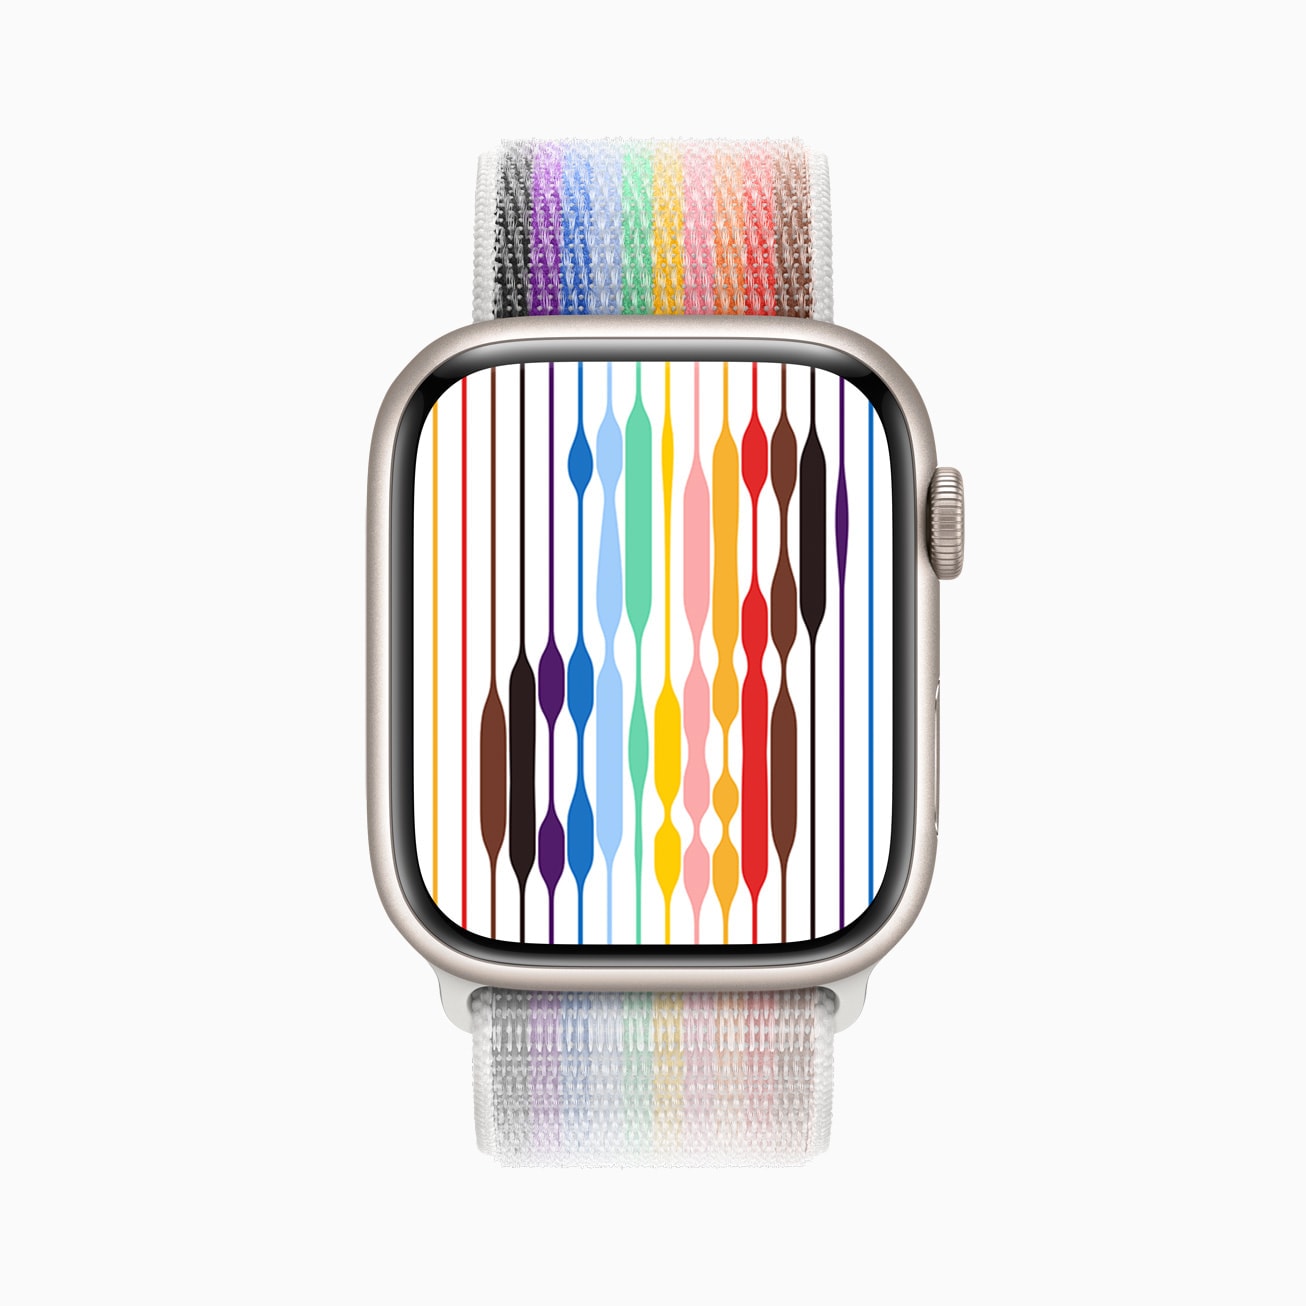 Have a closer look at the new Pride Threads face matching the Pride Edition Sport Loop. 